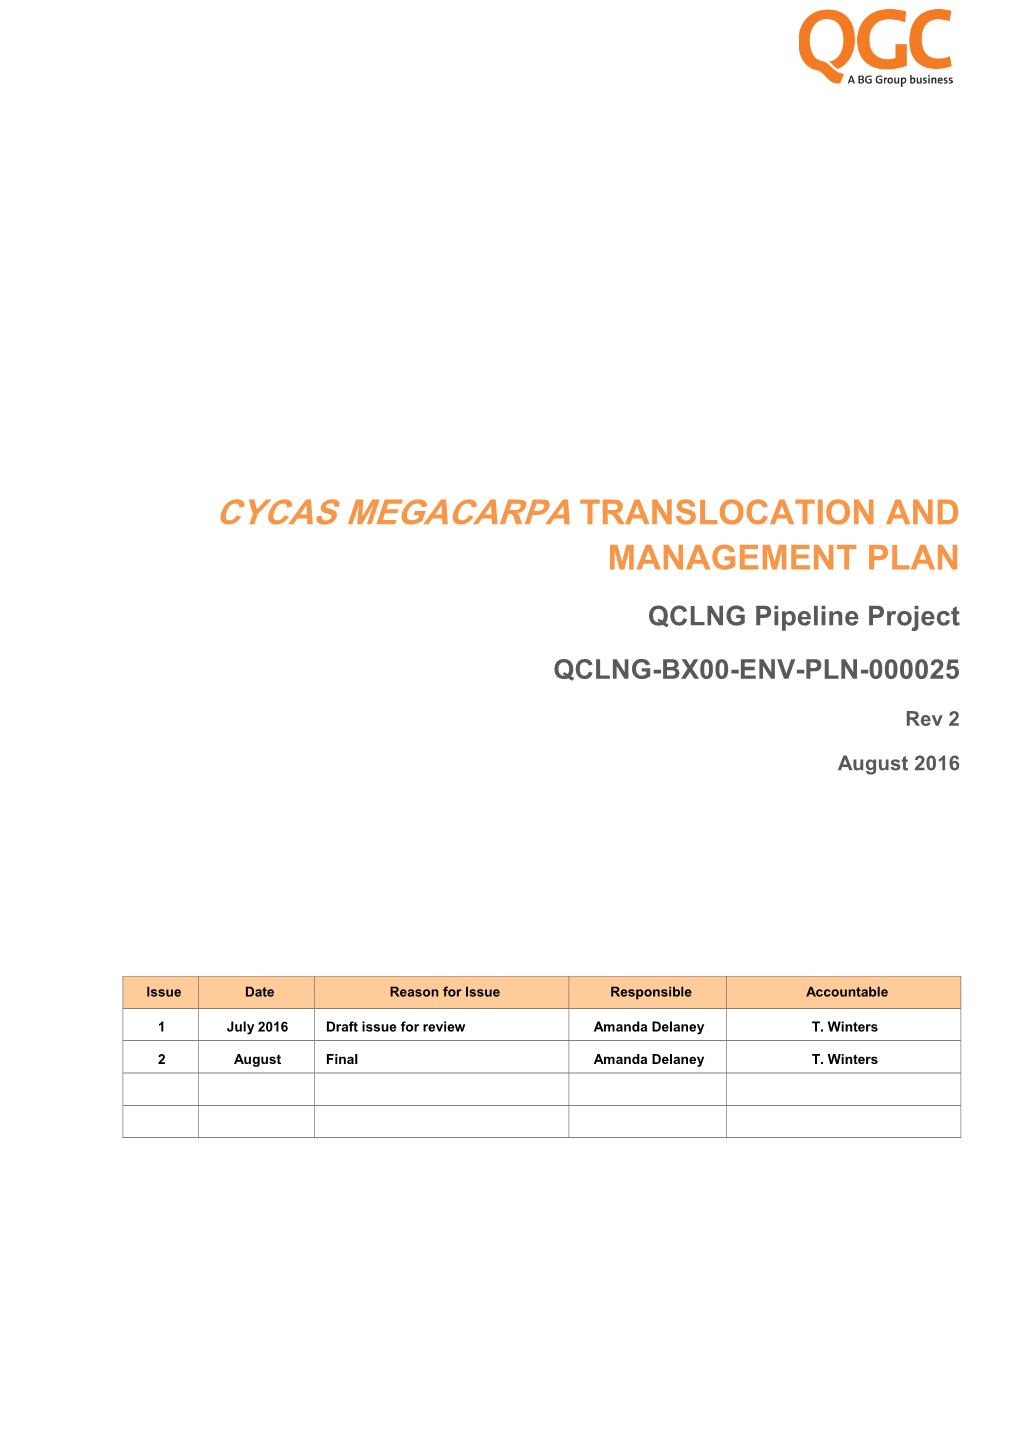 Cycas Megacarpa Translocation and Management Plan